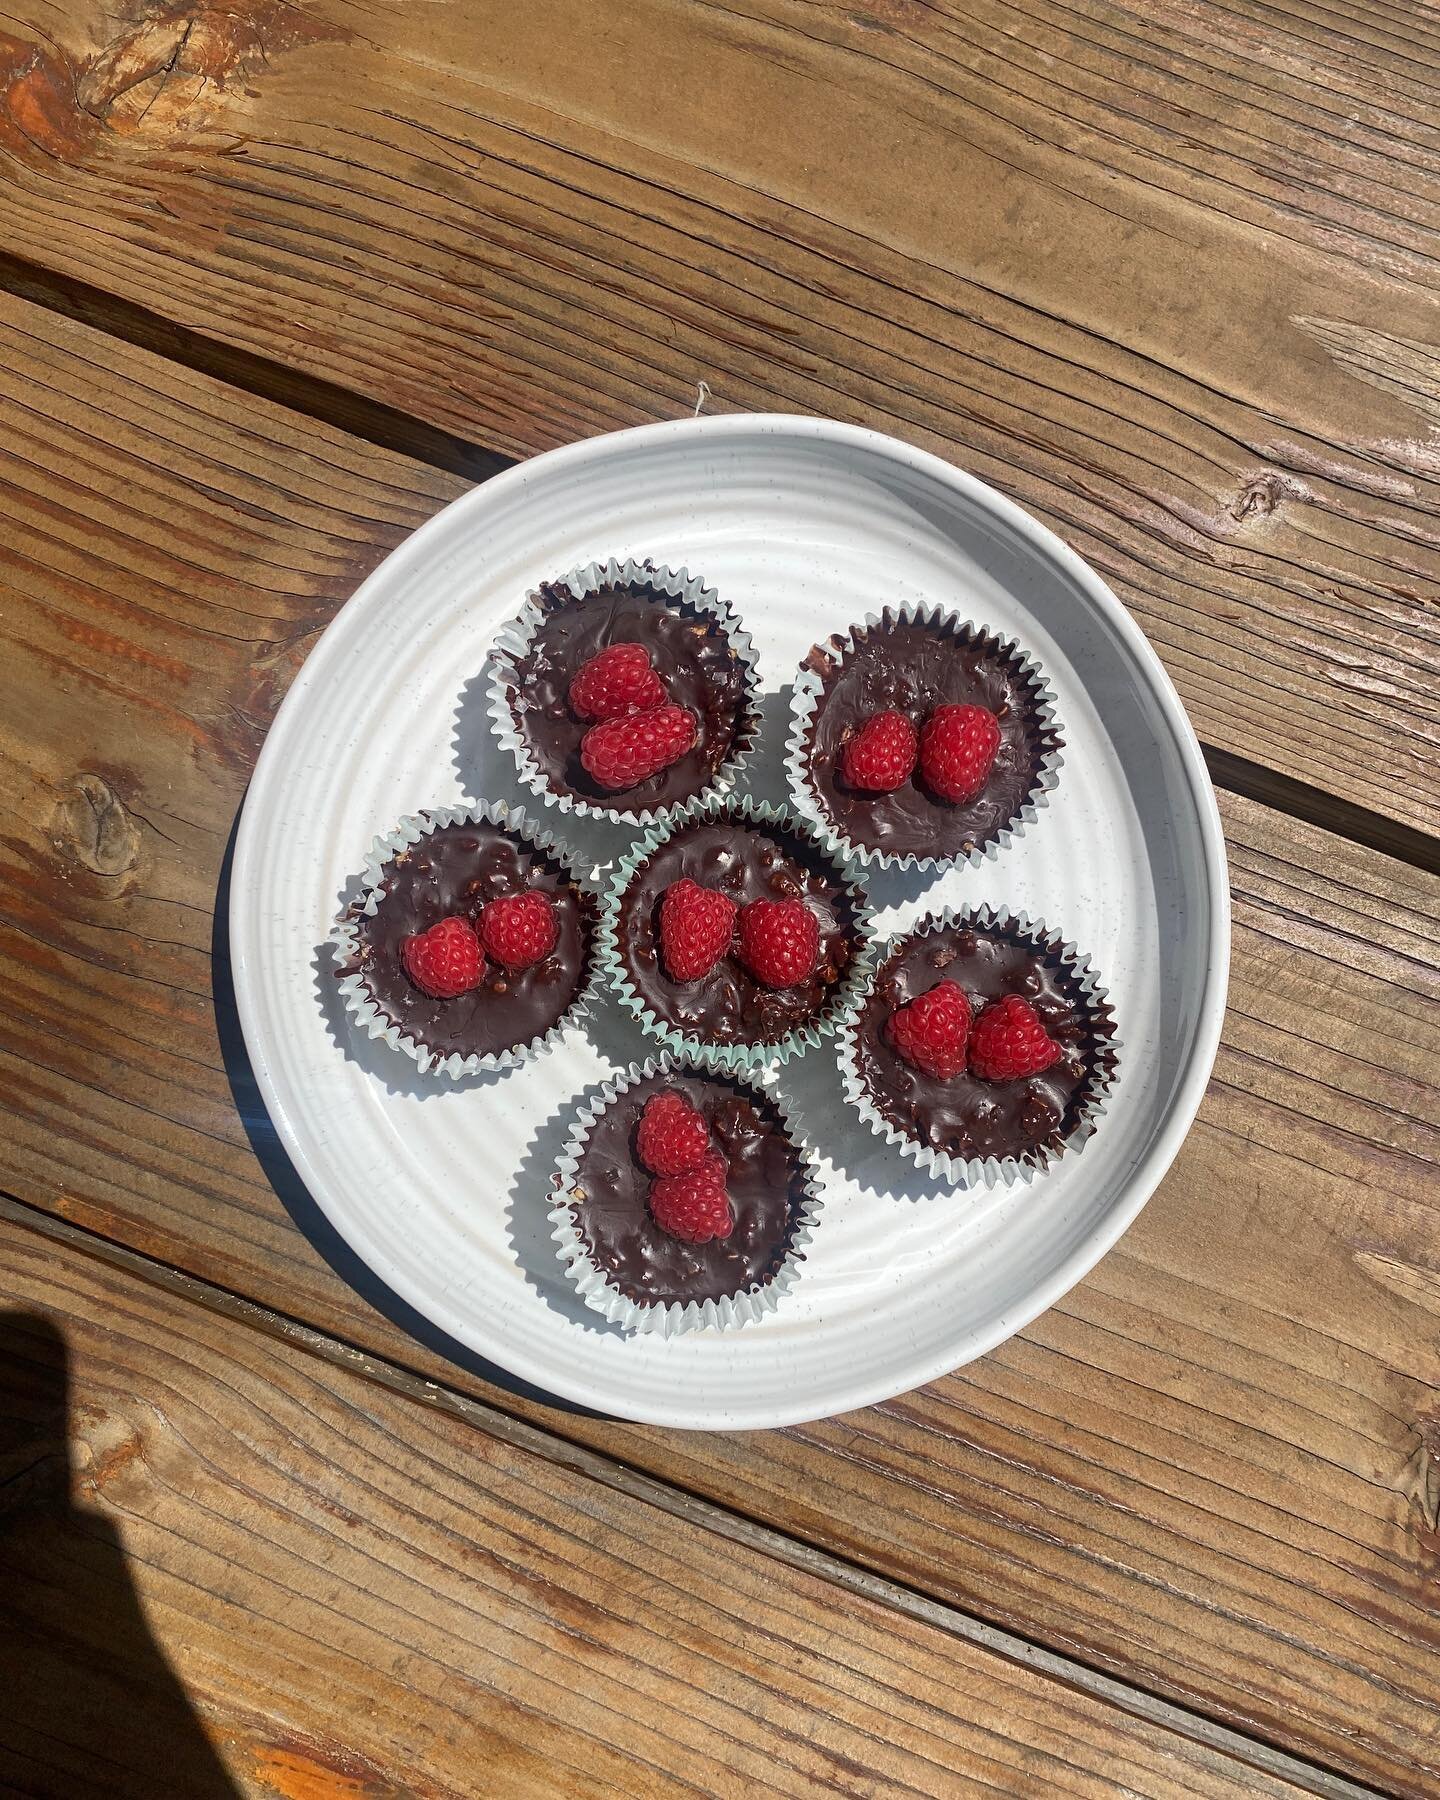 Crunchy raspberry oat nut butter cups for dad&rsquo;s birthday 🎂 Festive and loaded with healthy fats and a little hit of protein. 

Almond butter, tahini, oats, buckwheat groats, hemp seeds, honey, dark chocolate, sea salt, raspberries. Recipe base